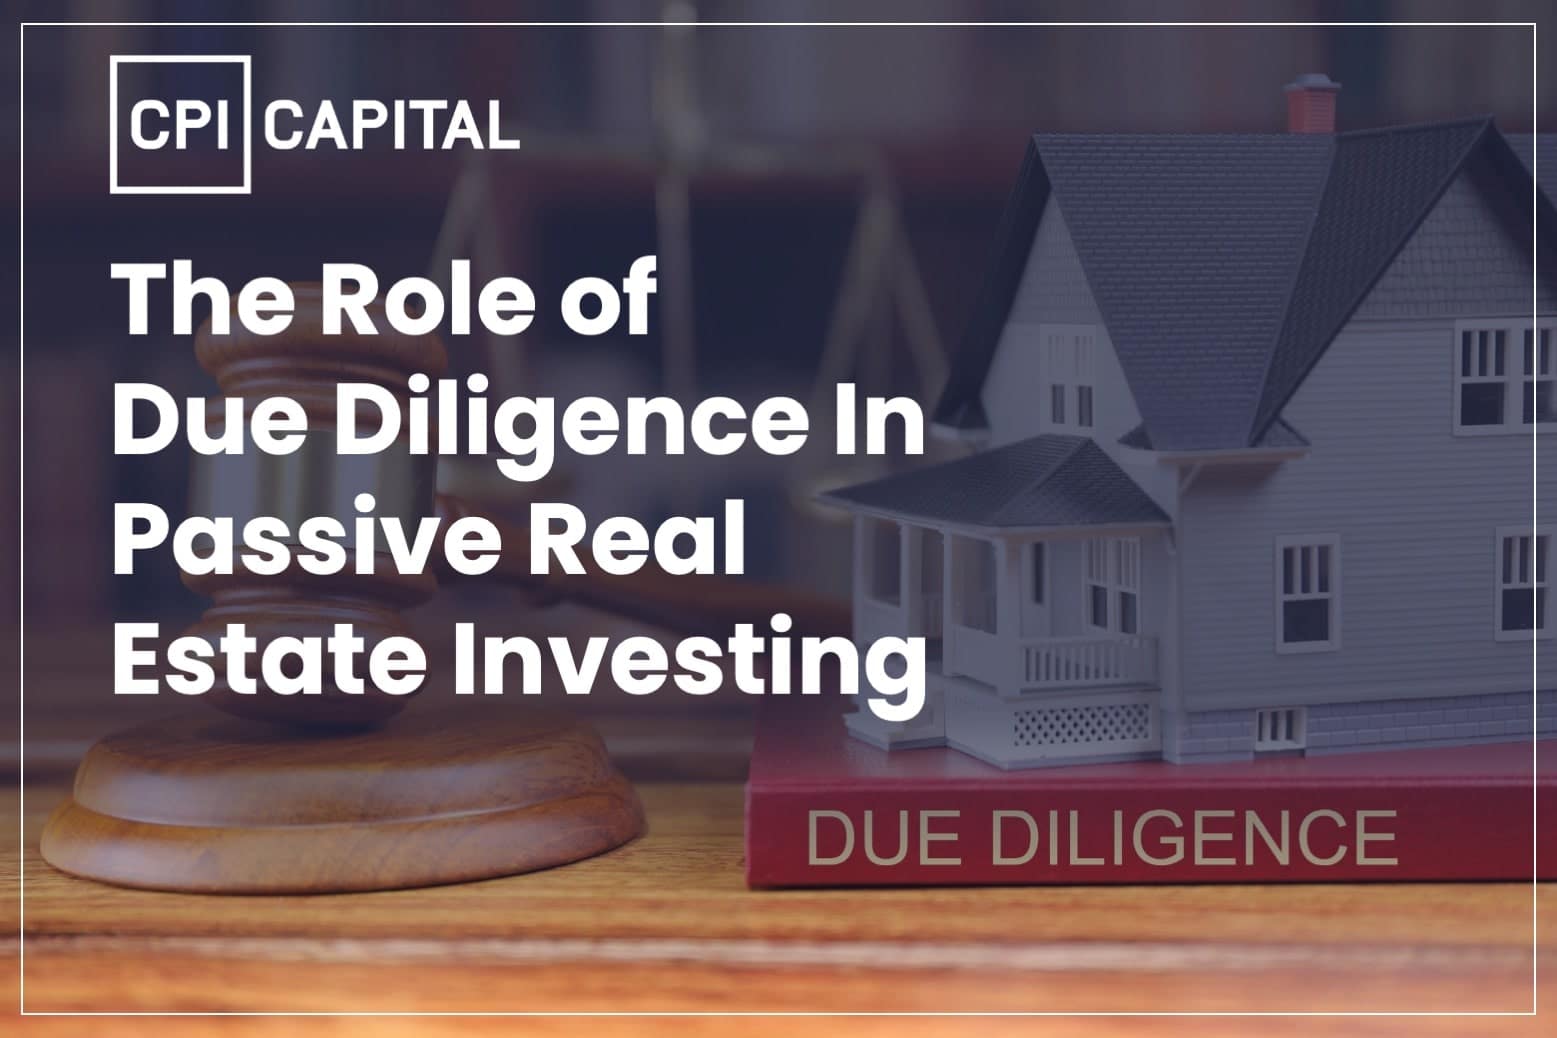 CPI-capital_The-Role-of-Due-Diligence-In-Passive-Real-Estate-Investing